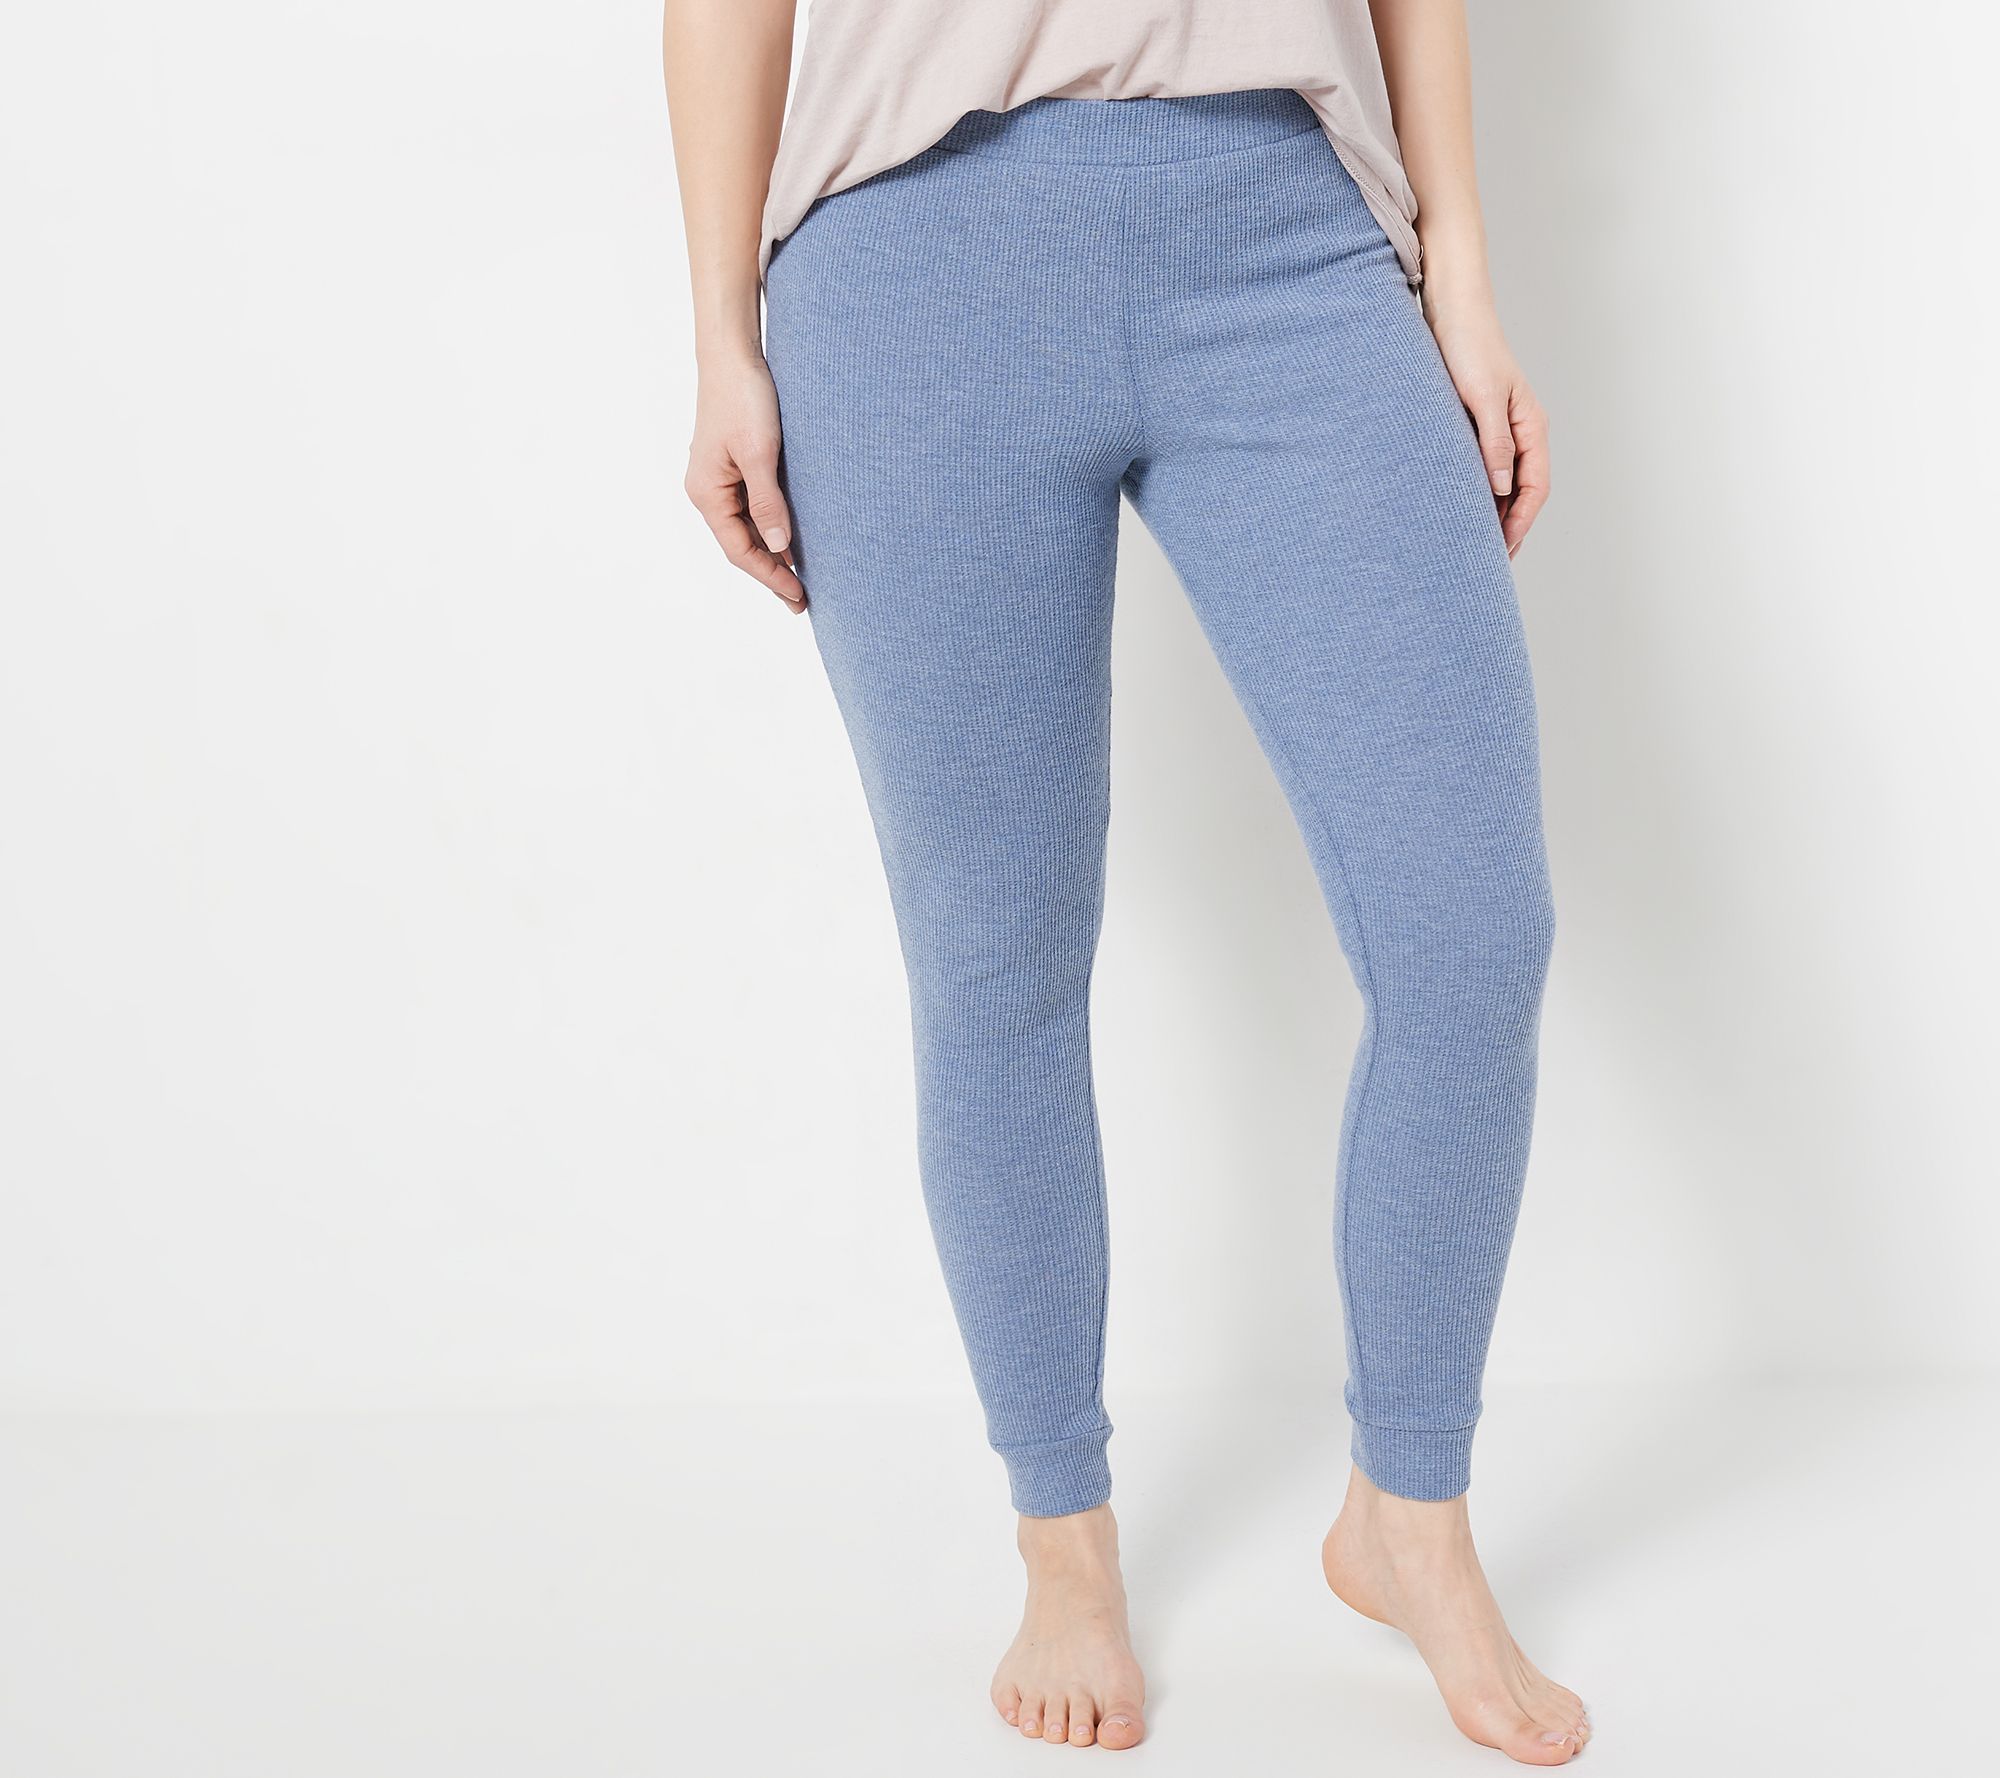 Aires Workout Leggings – trish stitched